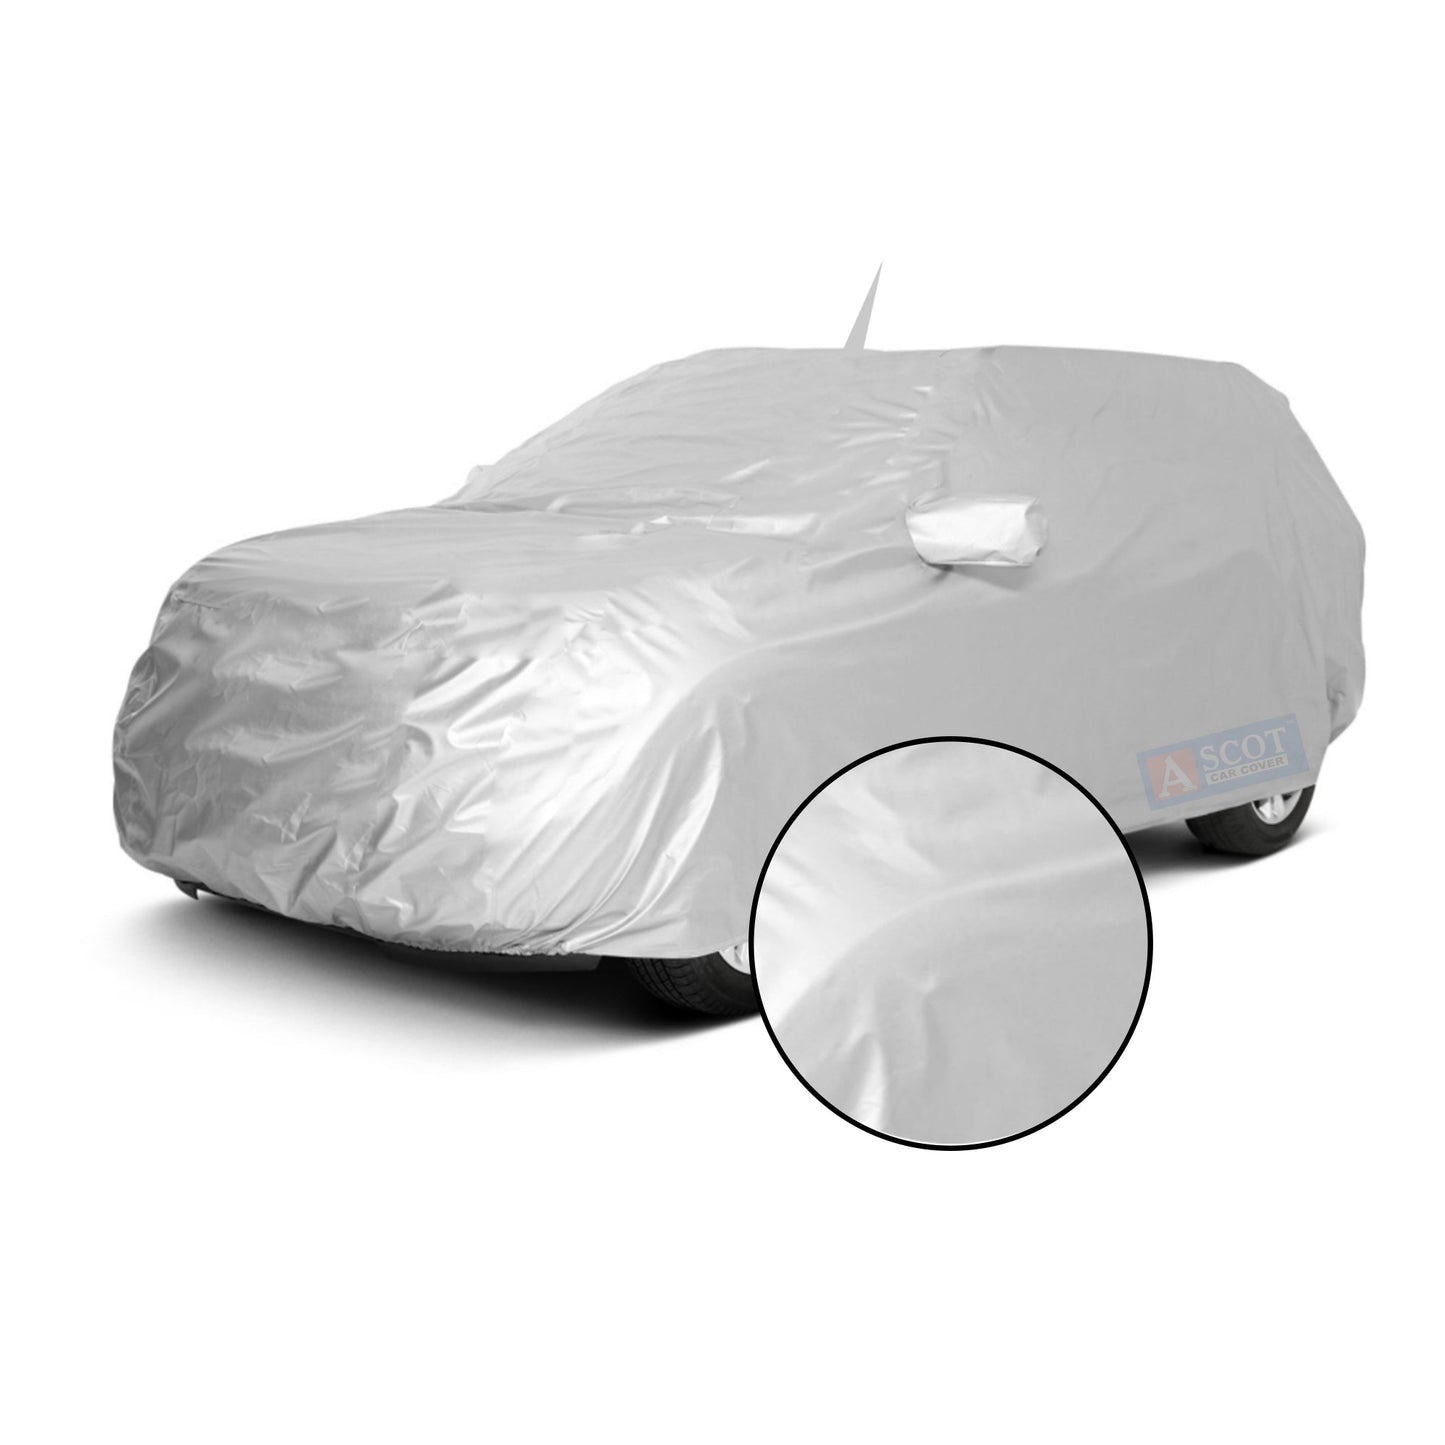 Ascot Volkswagen Taigun Car Body Cover Dust Proof, Trippel Stitched